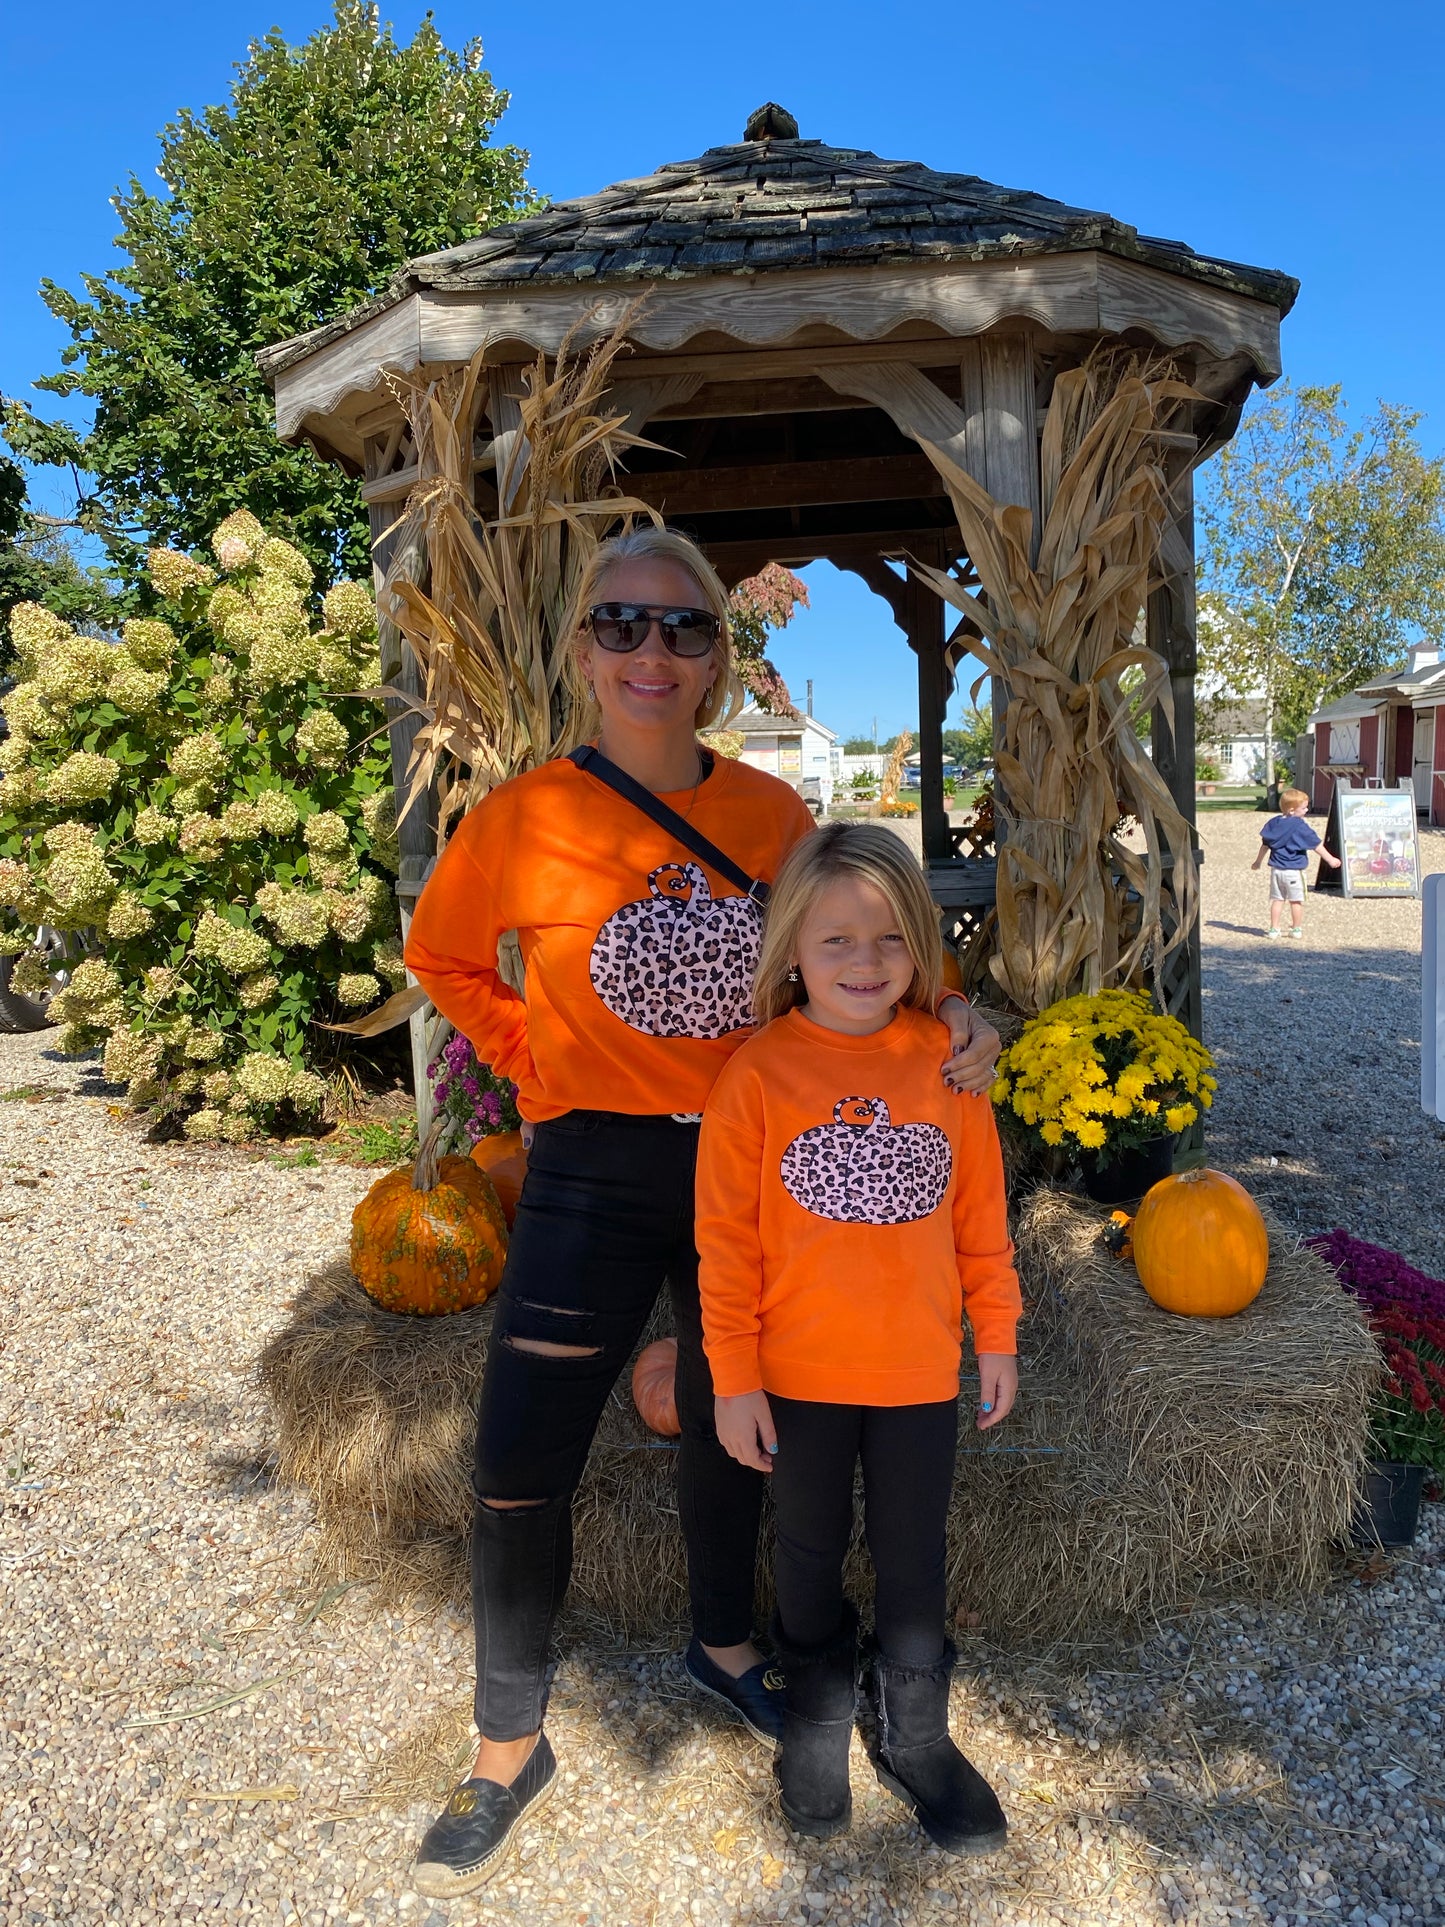 Mommy and me pumpkins